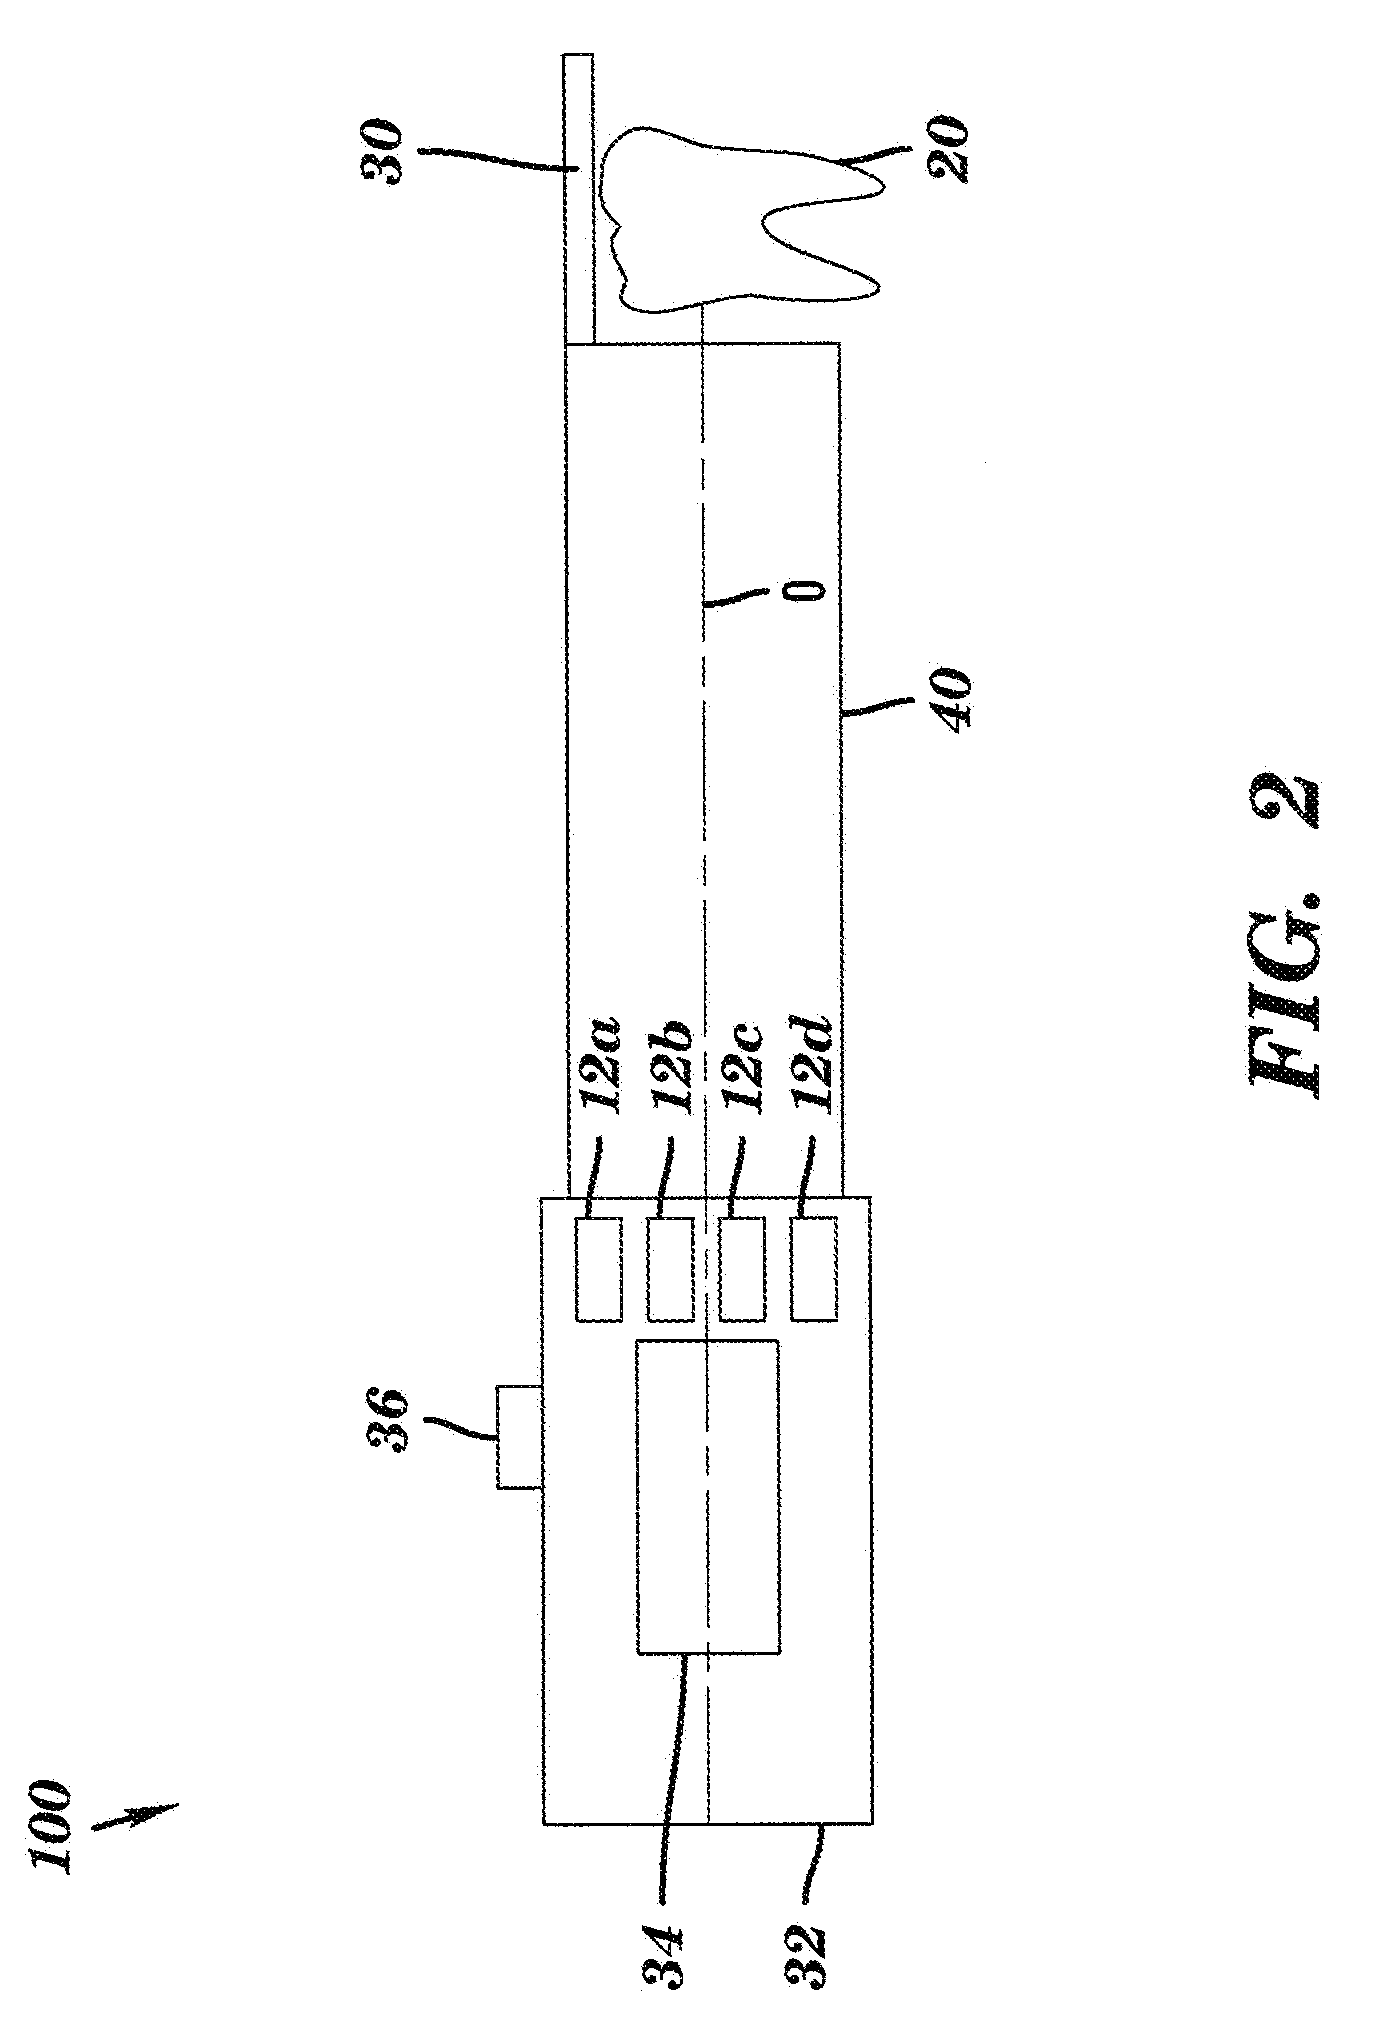 Intra-oral camera for diagnostic and cosmetic imaging